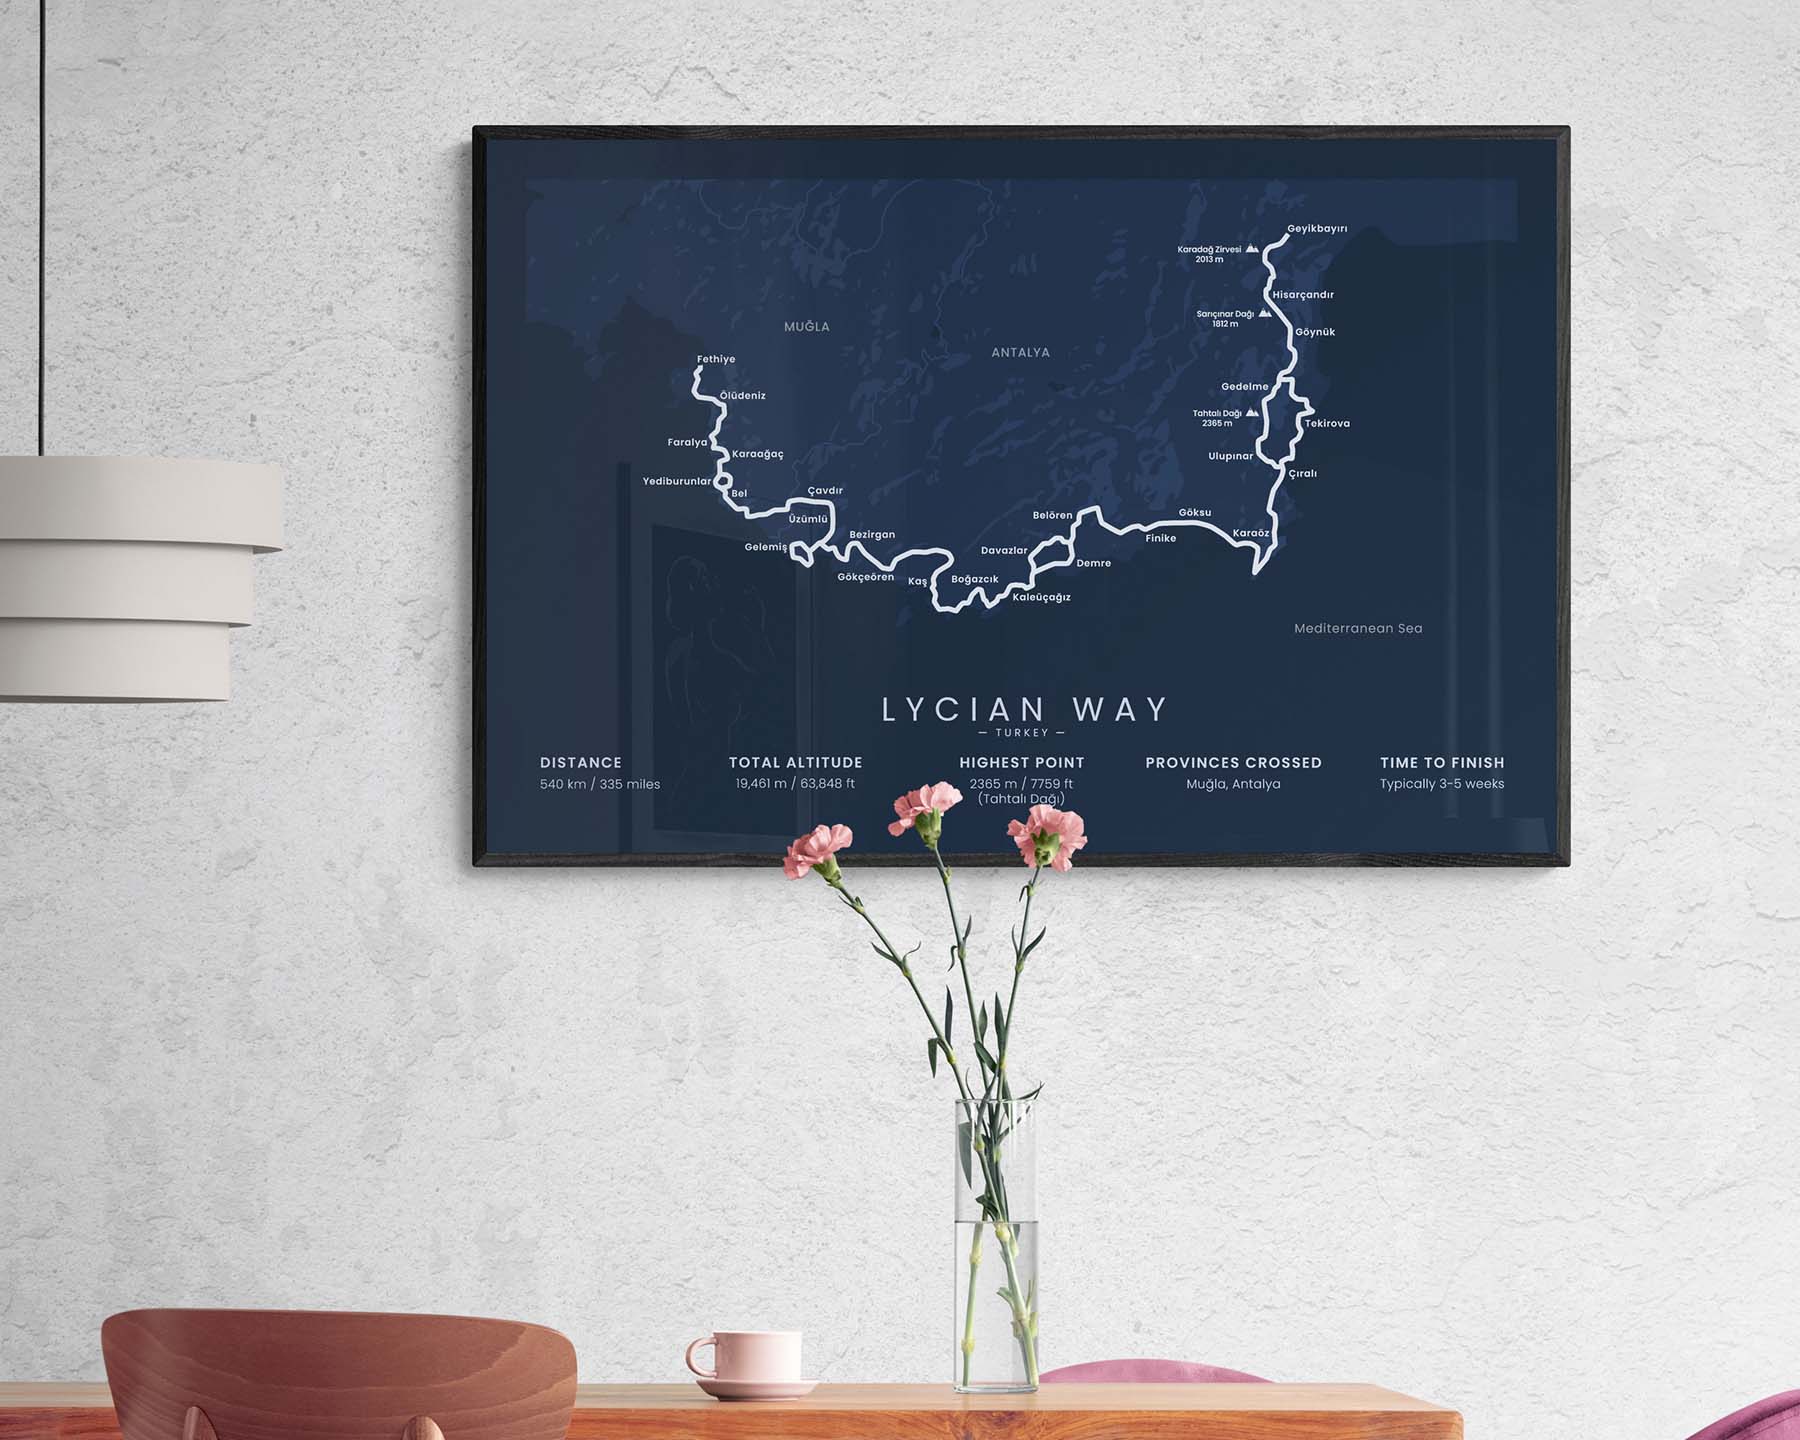 Lycian Way hiking trail in Mediterranean, South Turkey, minimalist map poster with black frame and blue background in modern dining room decor